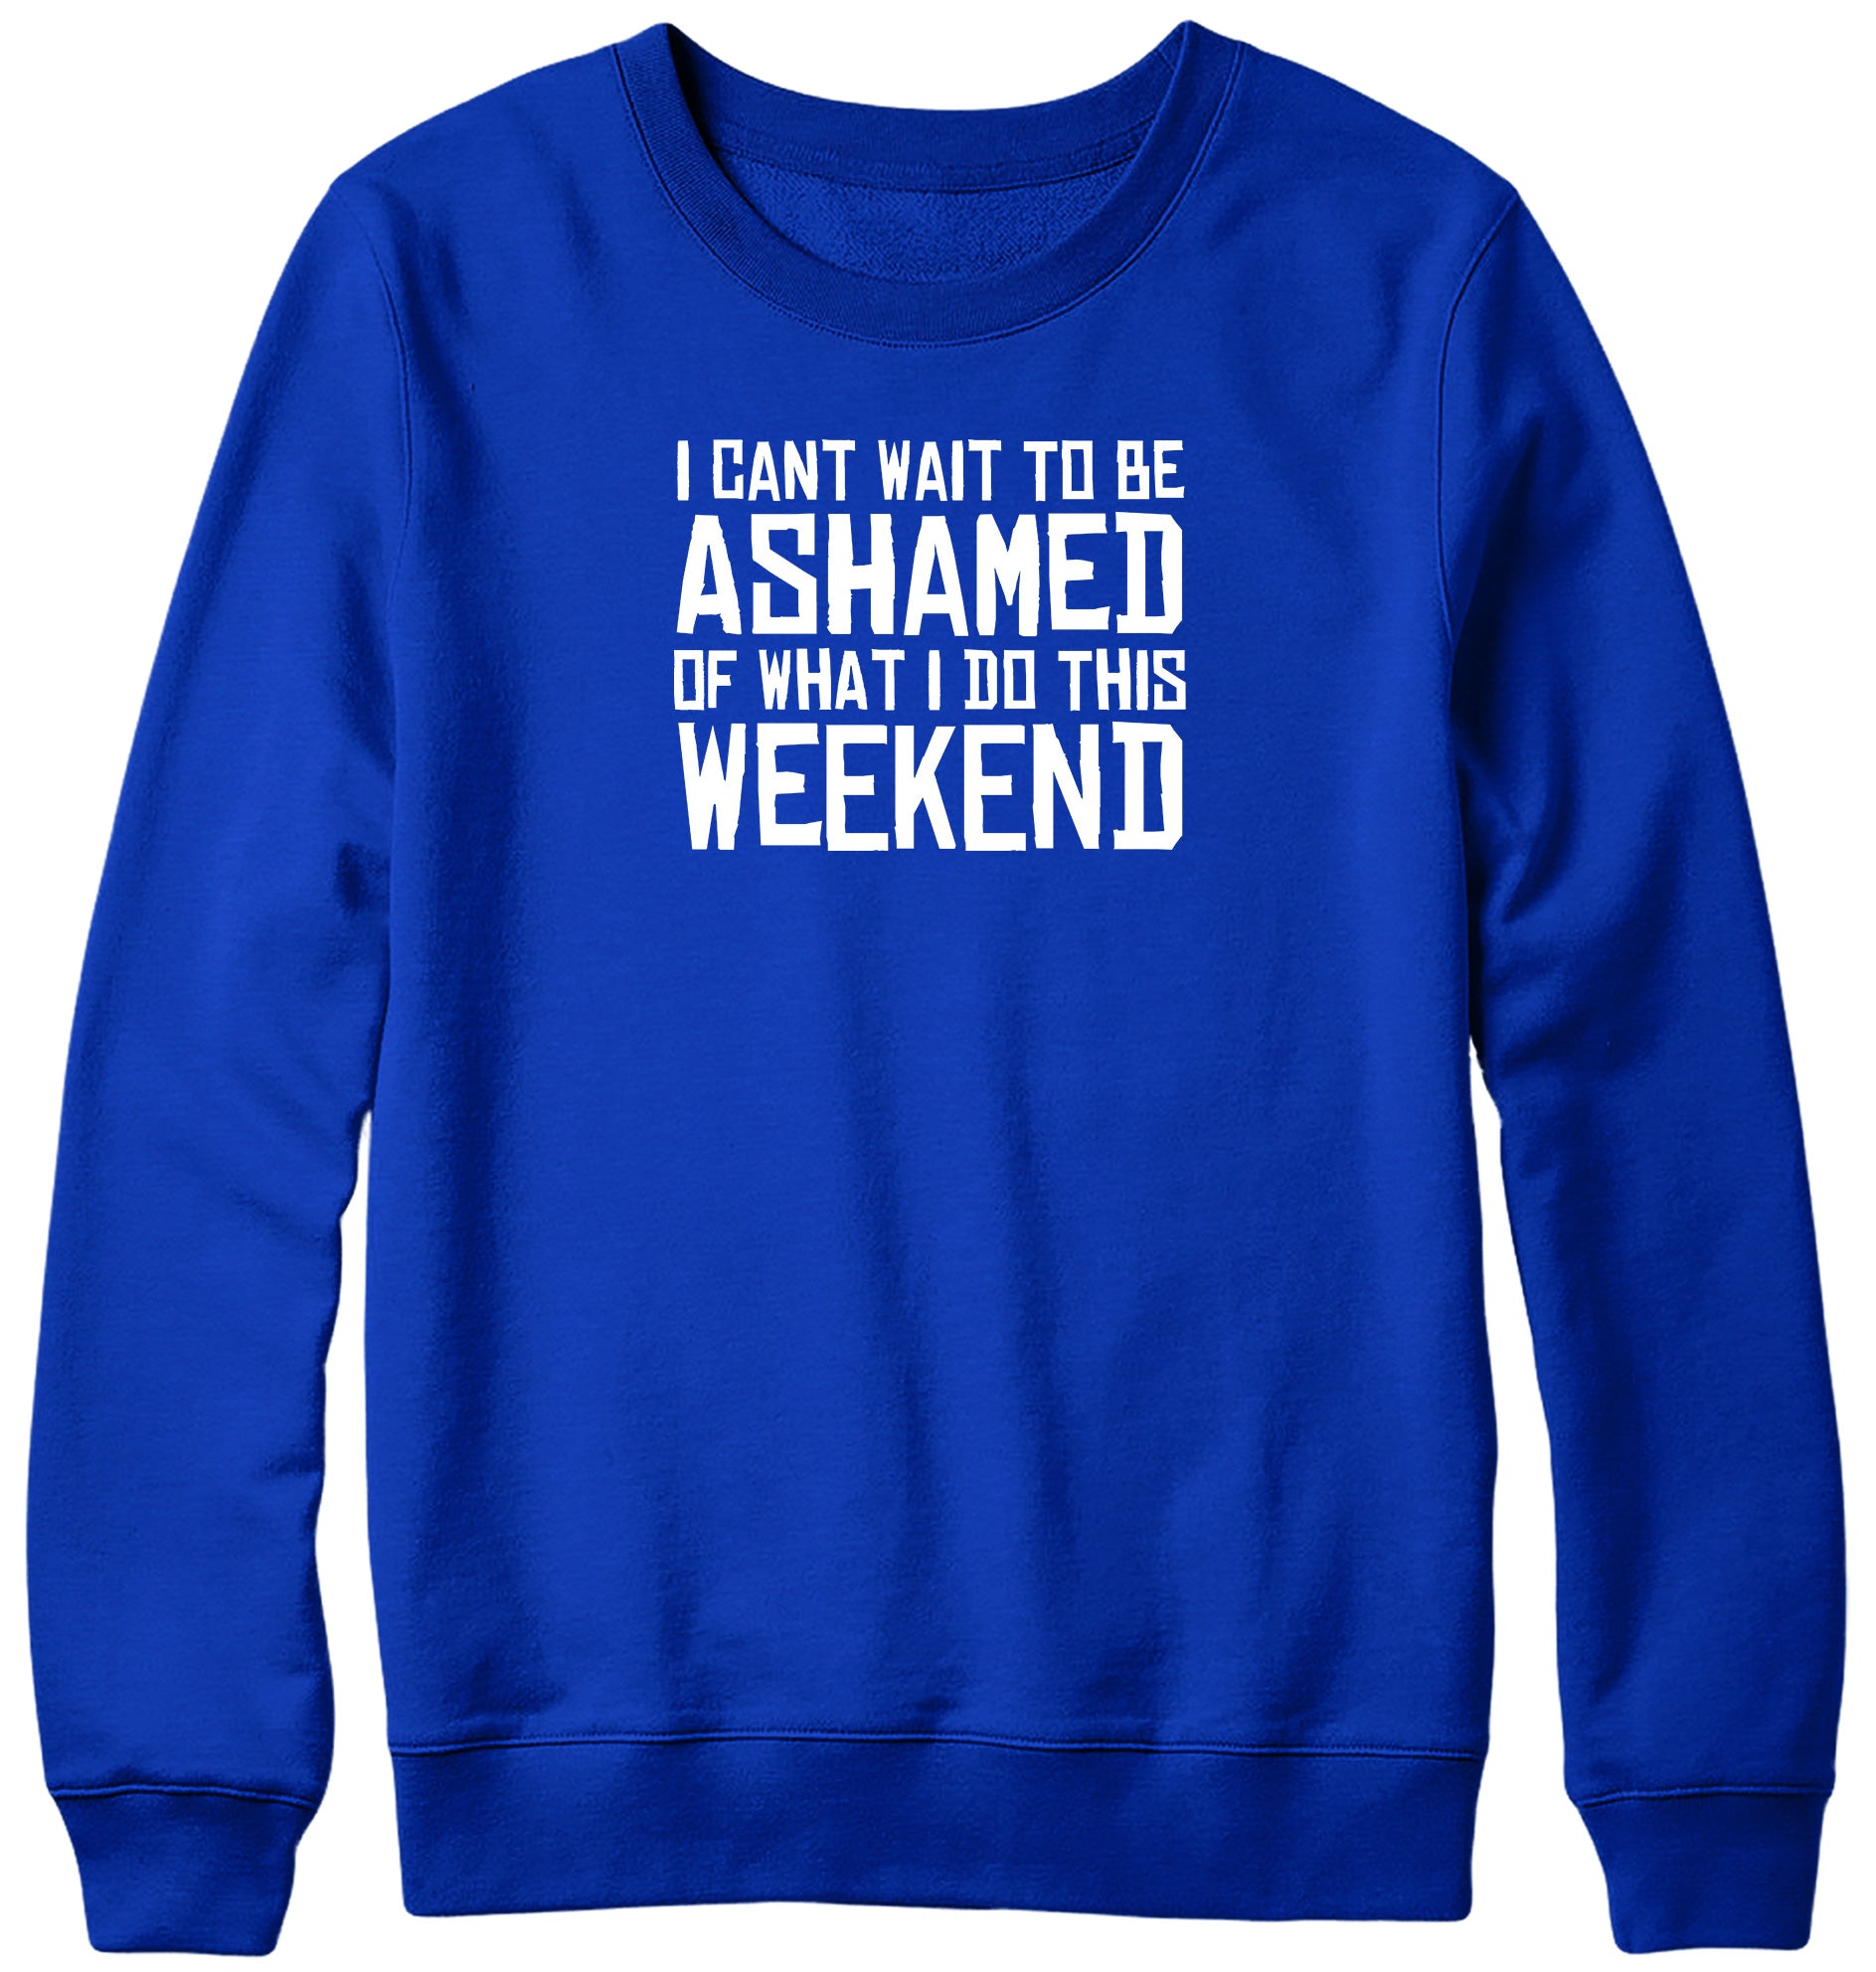 I CAN'T WAIT TO BE ASHAMED OF WHAT I DO THIS WEEKEND WOMENS LADIES MENS UNISEX SWEATSHIRT